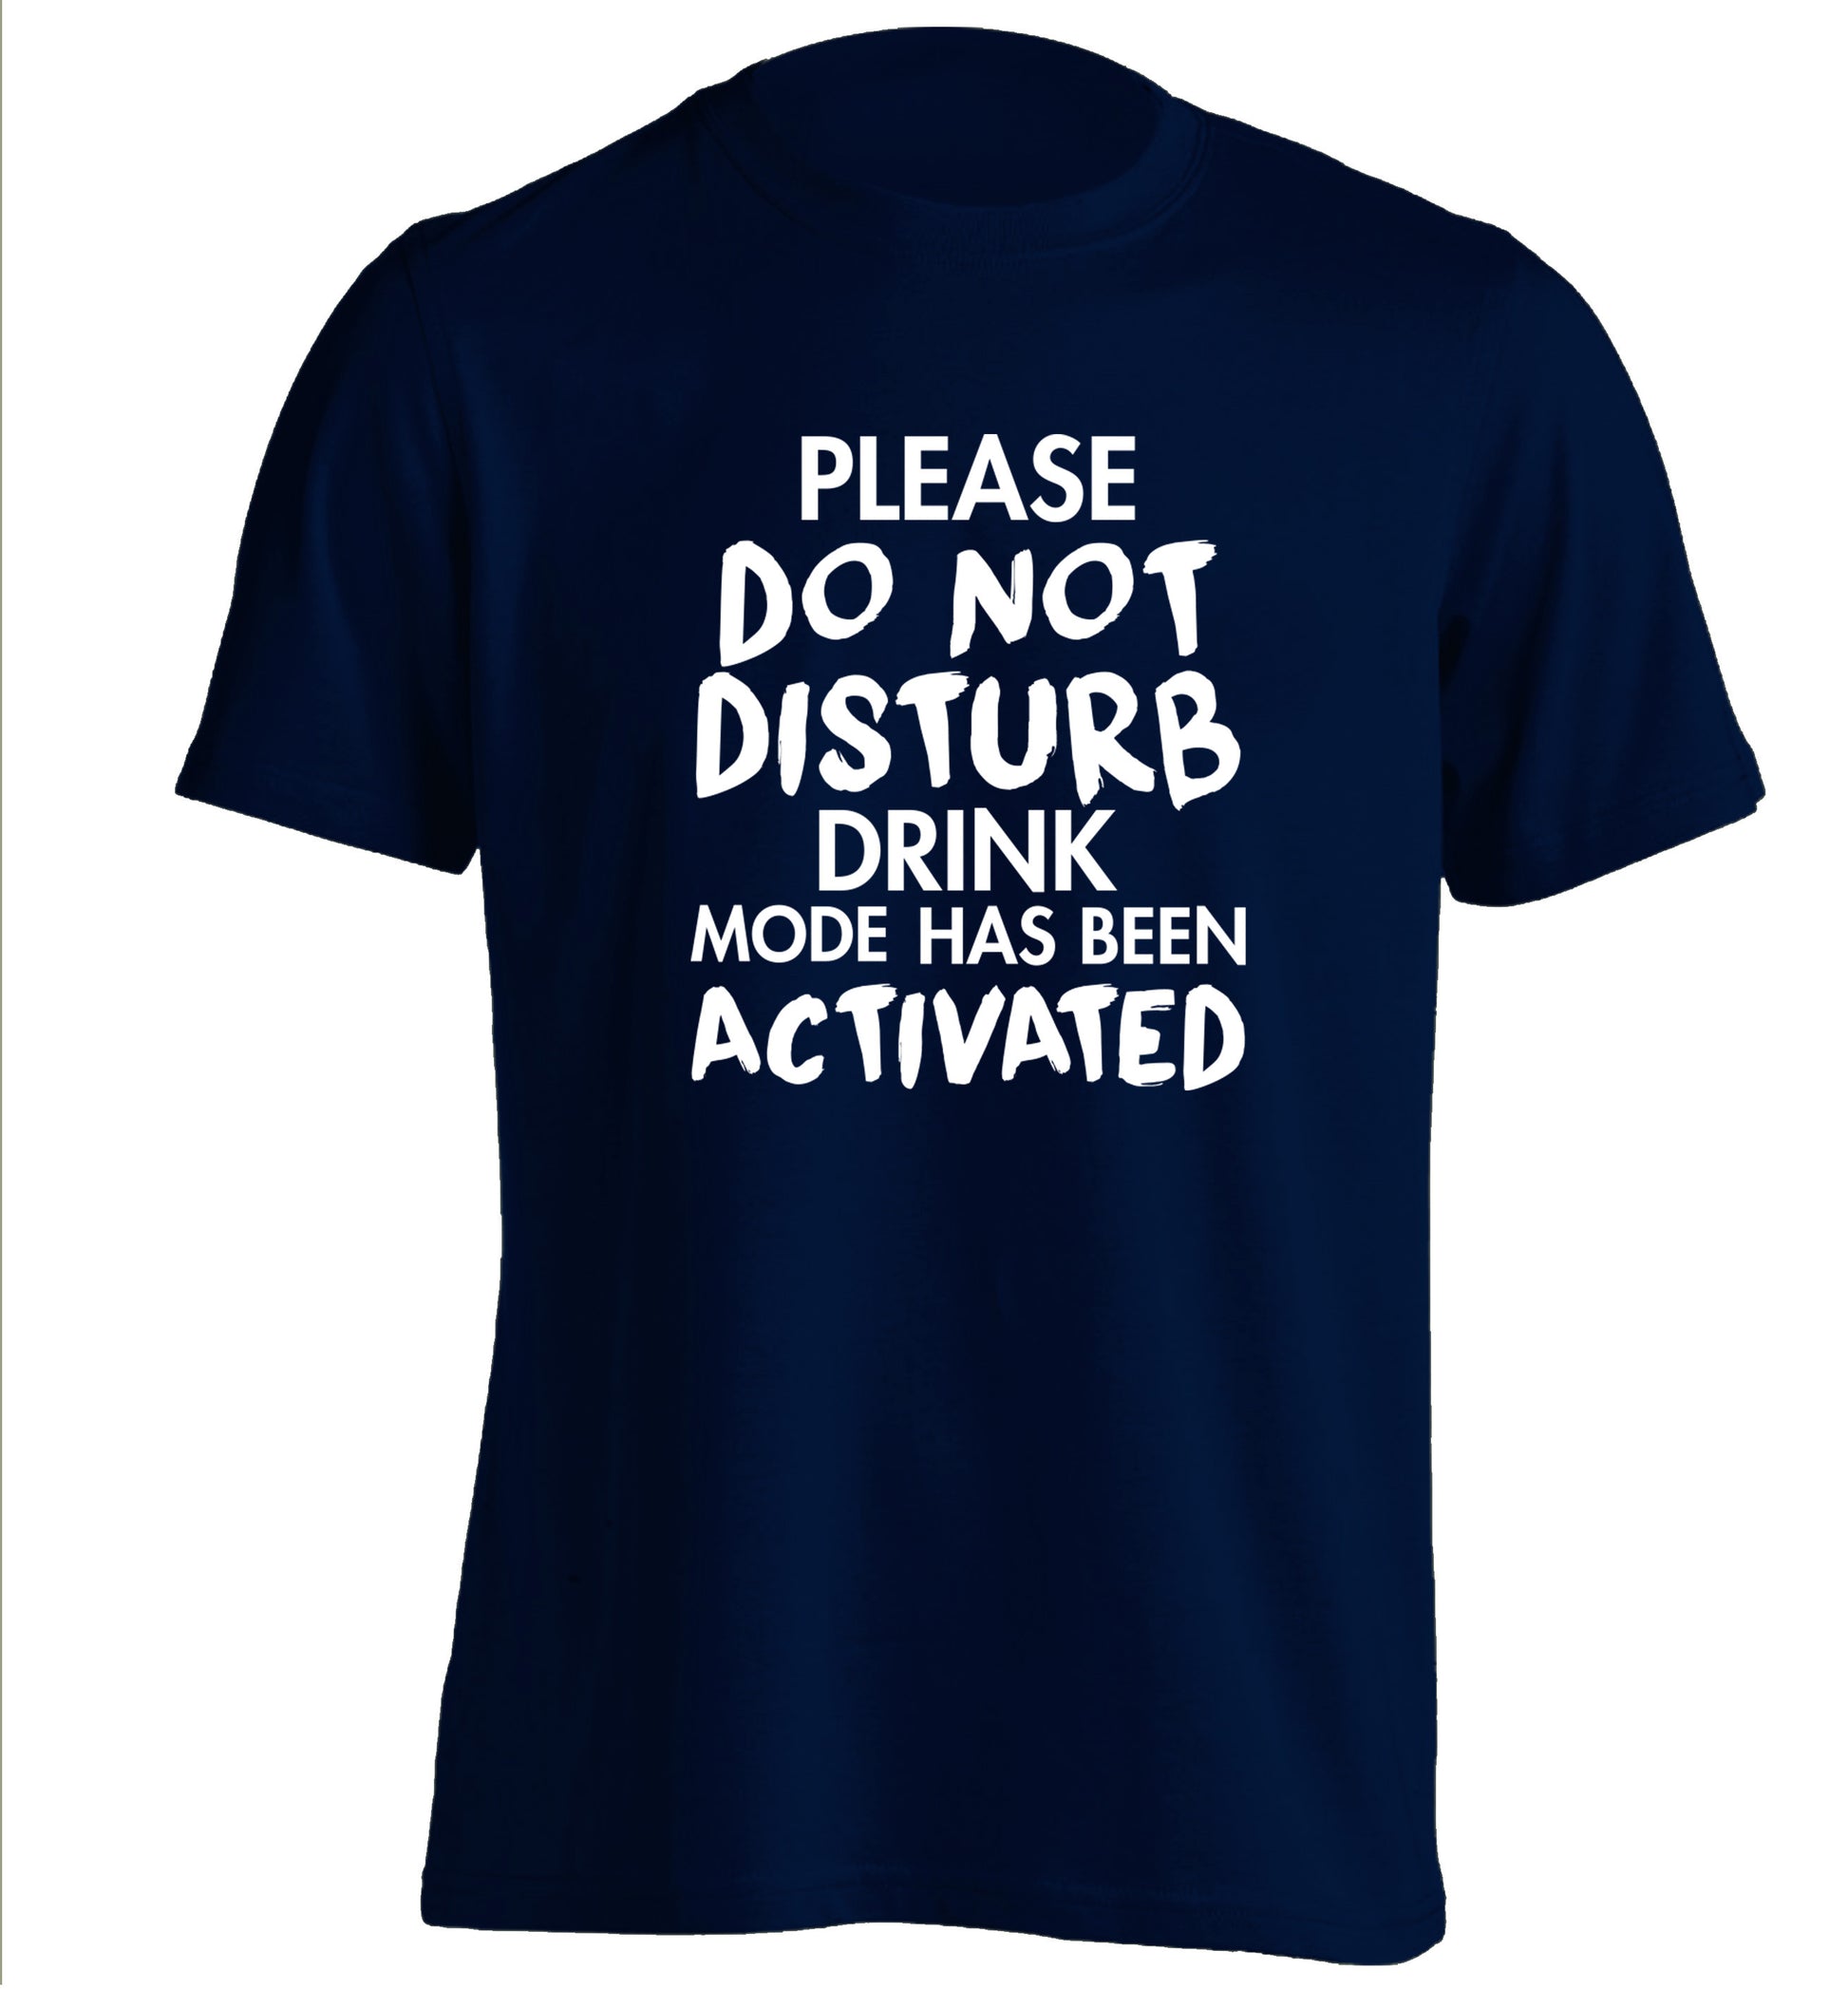 Please do not disturb drink mode has been activated adults unisex navy Tshirt 2XL